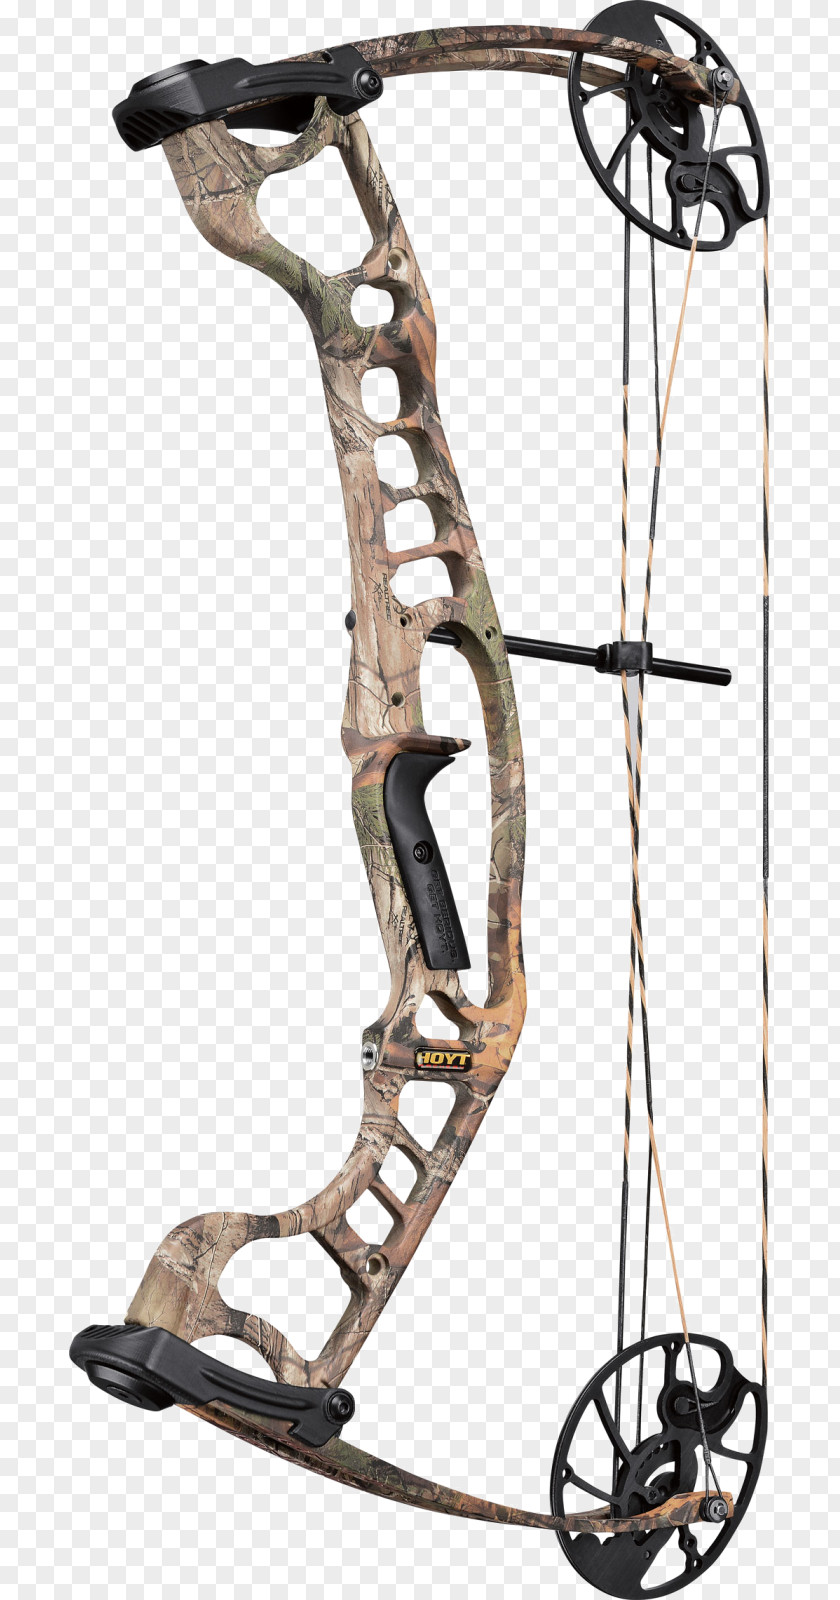 Compound Bows Bow And Arrow Bowhunting Recurve PNG